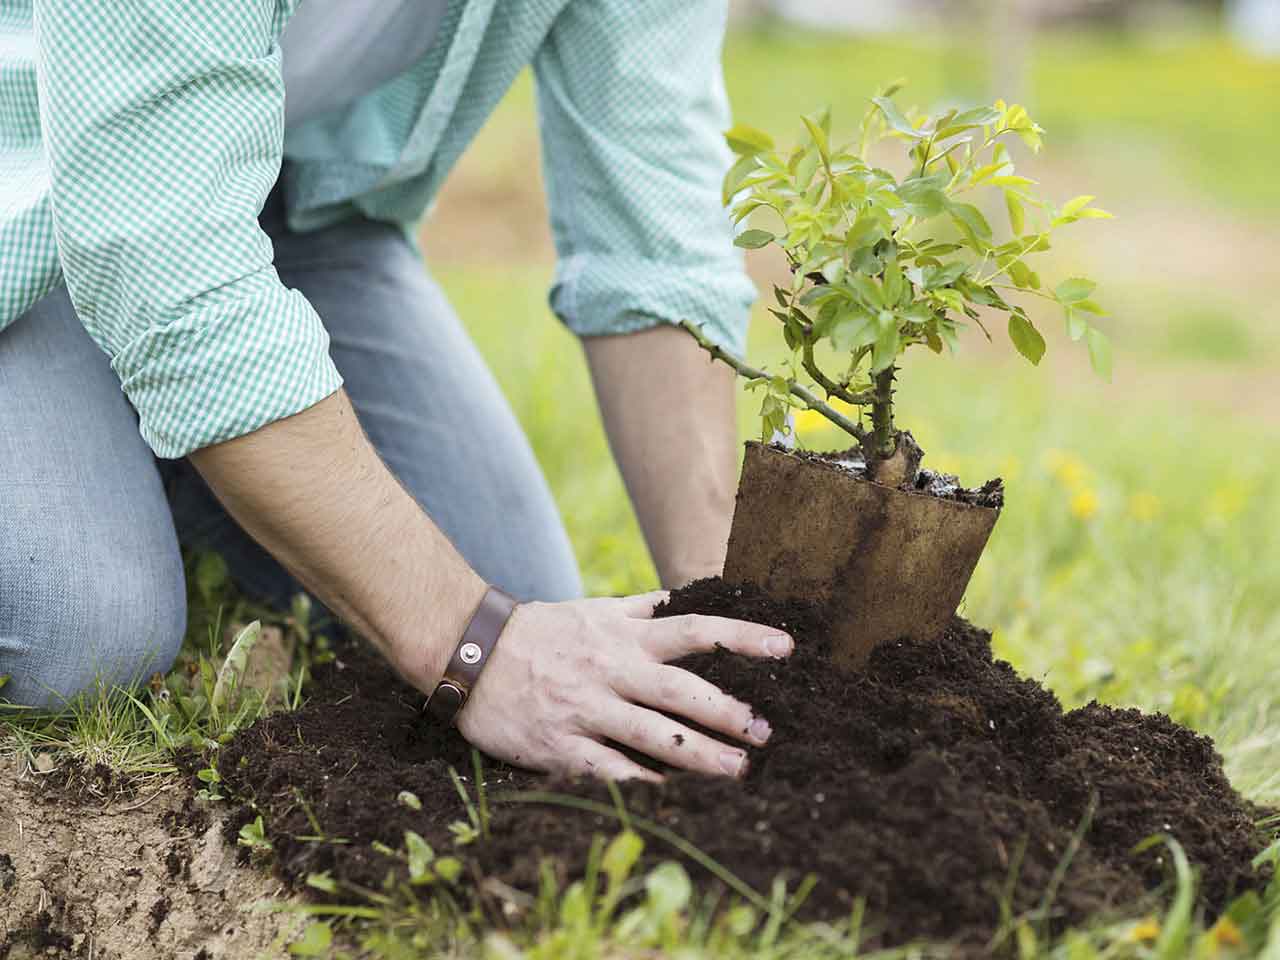 Man planting a tree in the garden